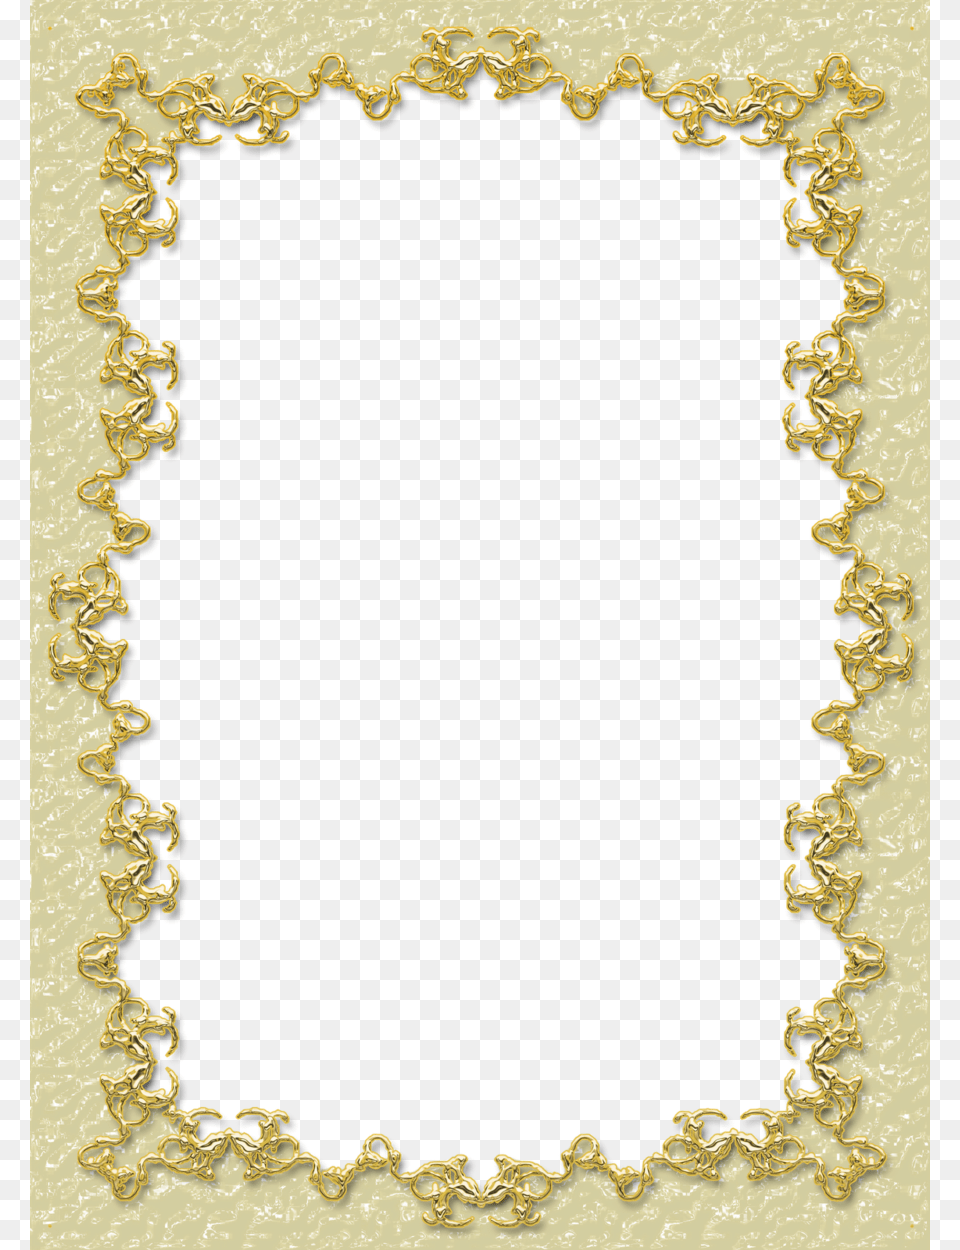 Frames For Photoshop Clipart Borders And Frames Photography Frames For Photoshop, Accessories, Jewelry, Necklace Png Image